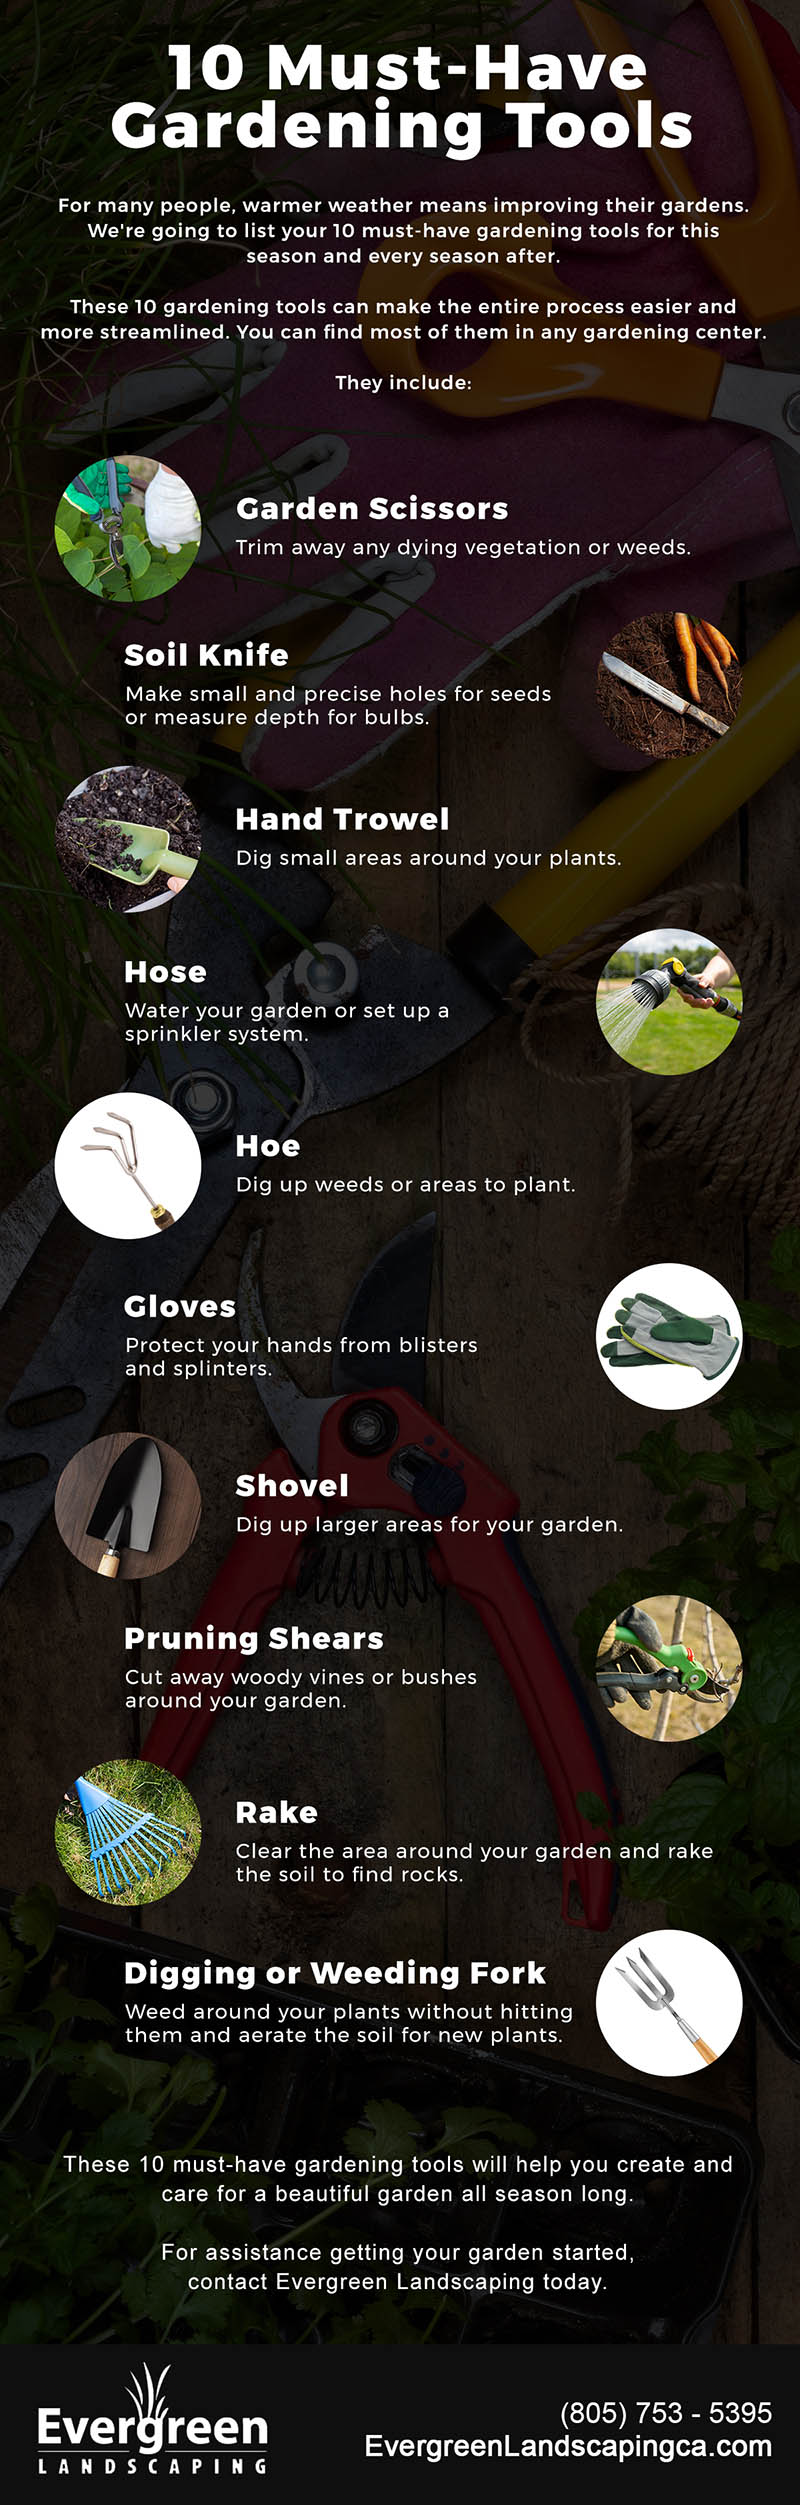 10 must-have gardening tools